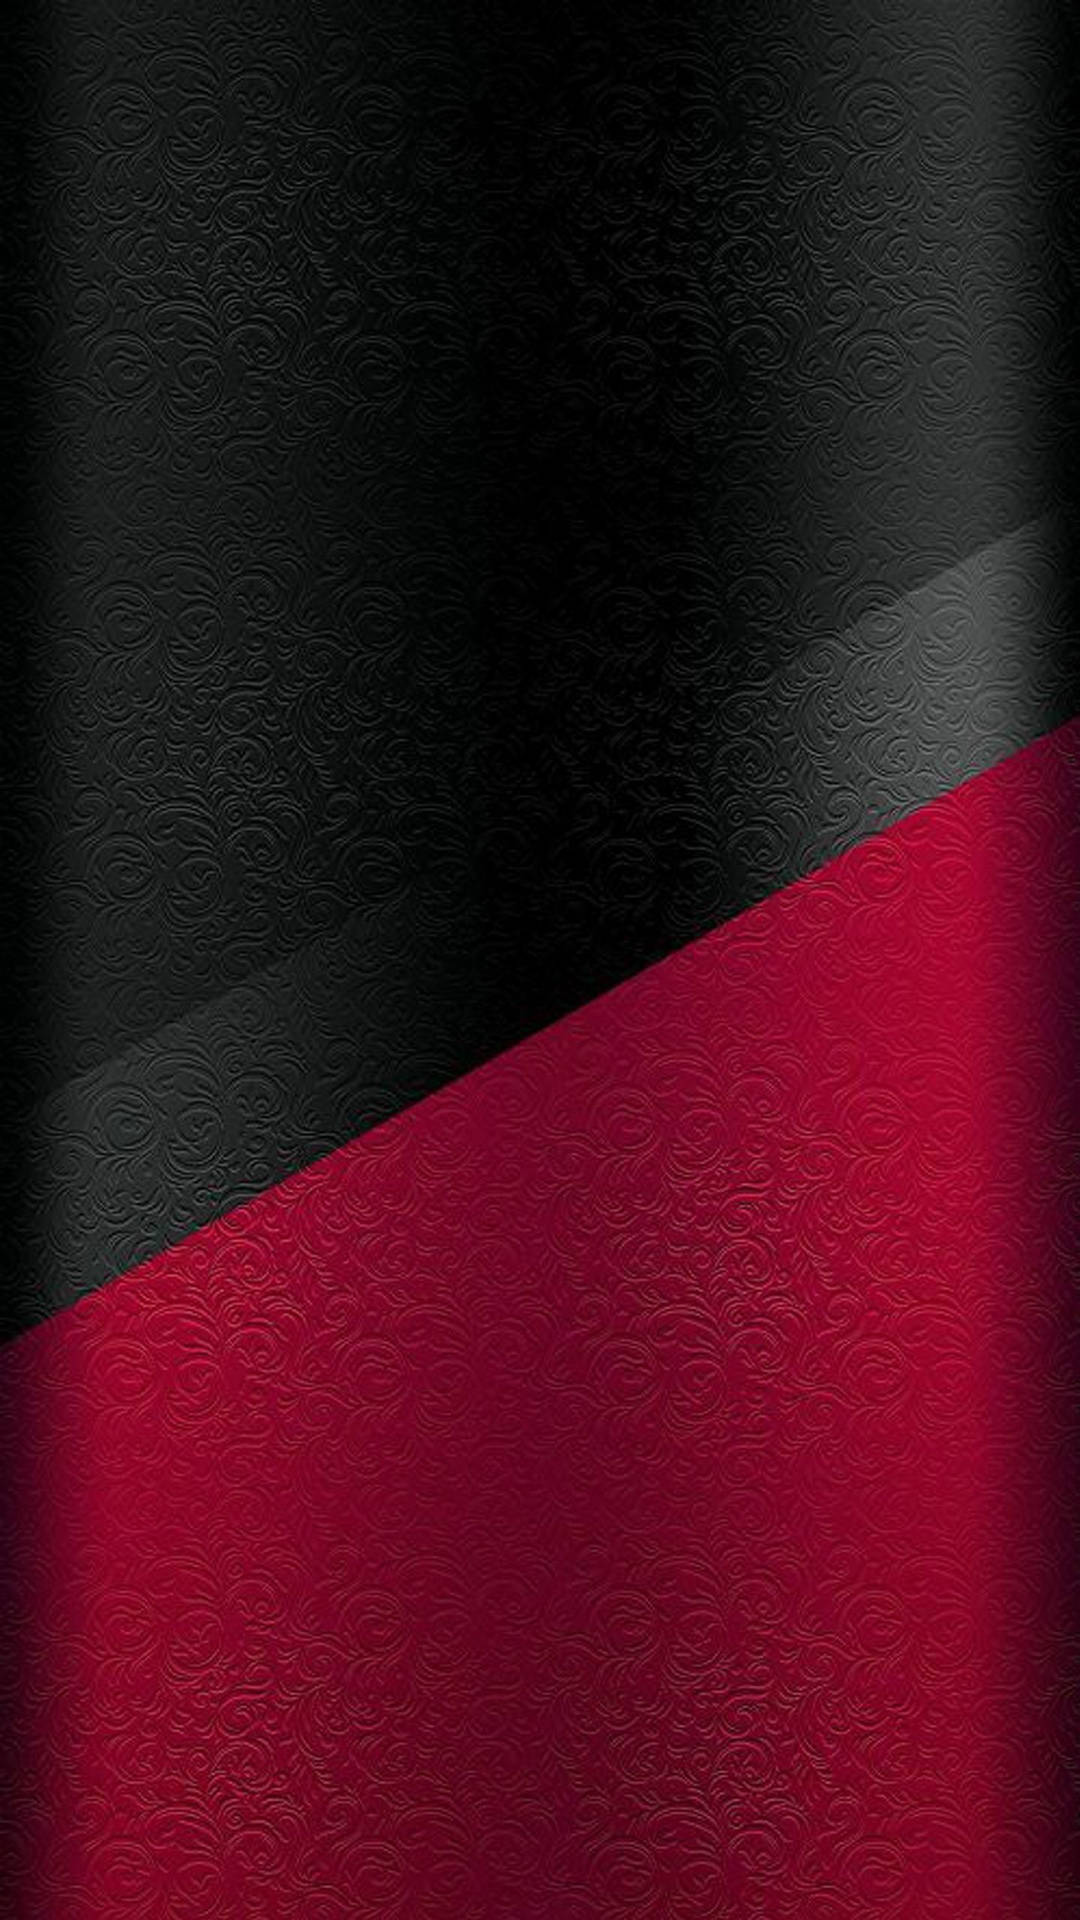 Striking black and red leather texture as iPhone wallpaper Wallpaper